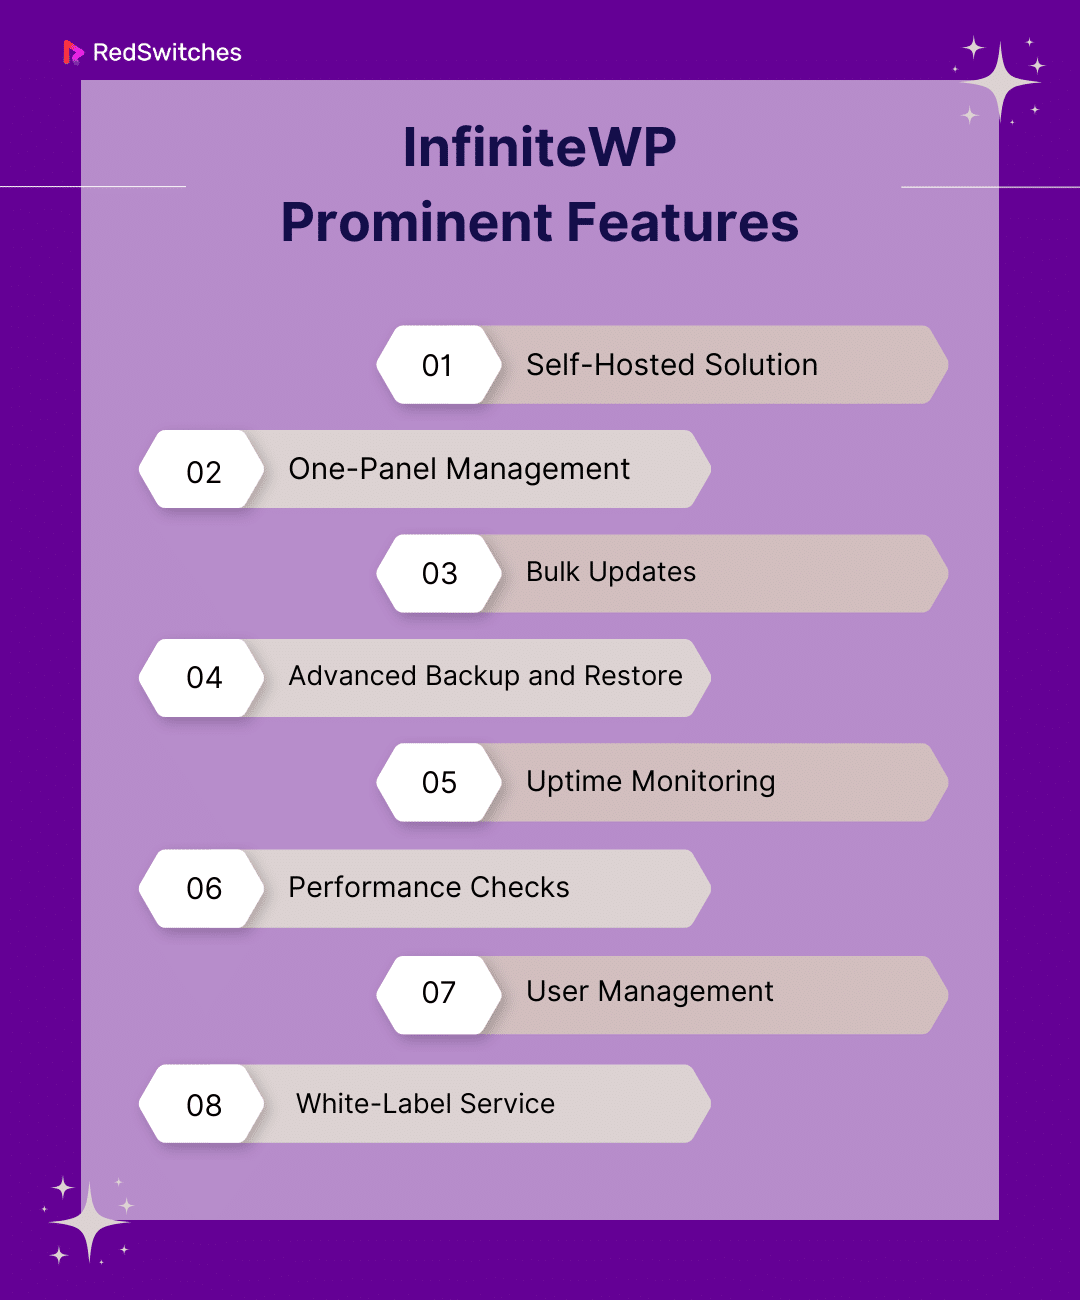 InfiniteWP Prominent Features